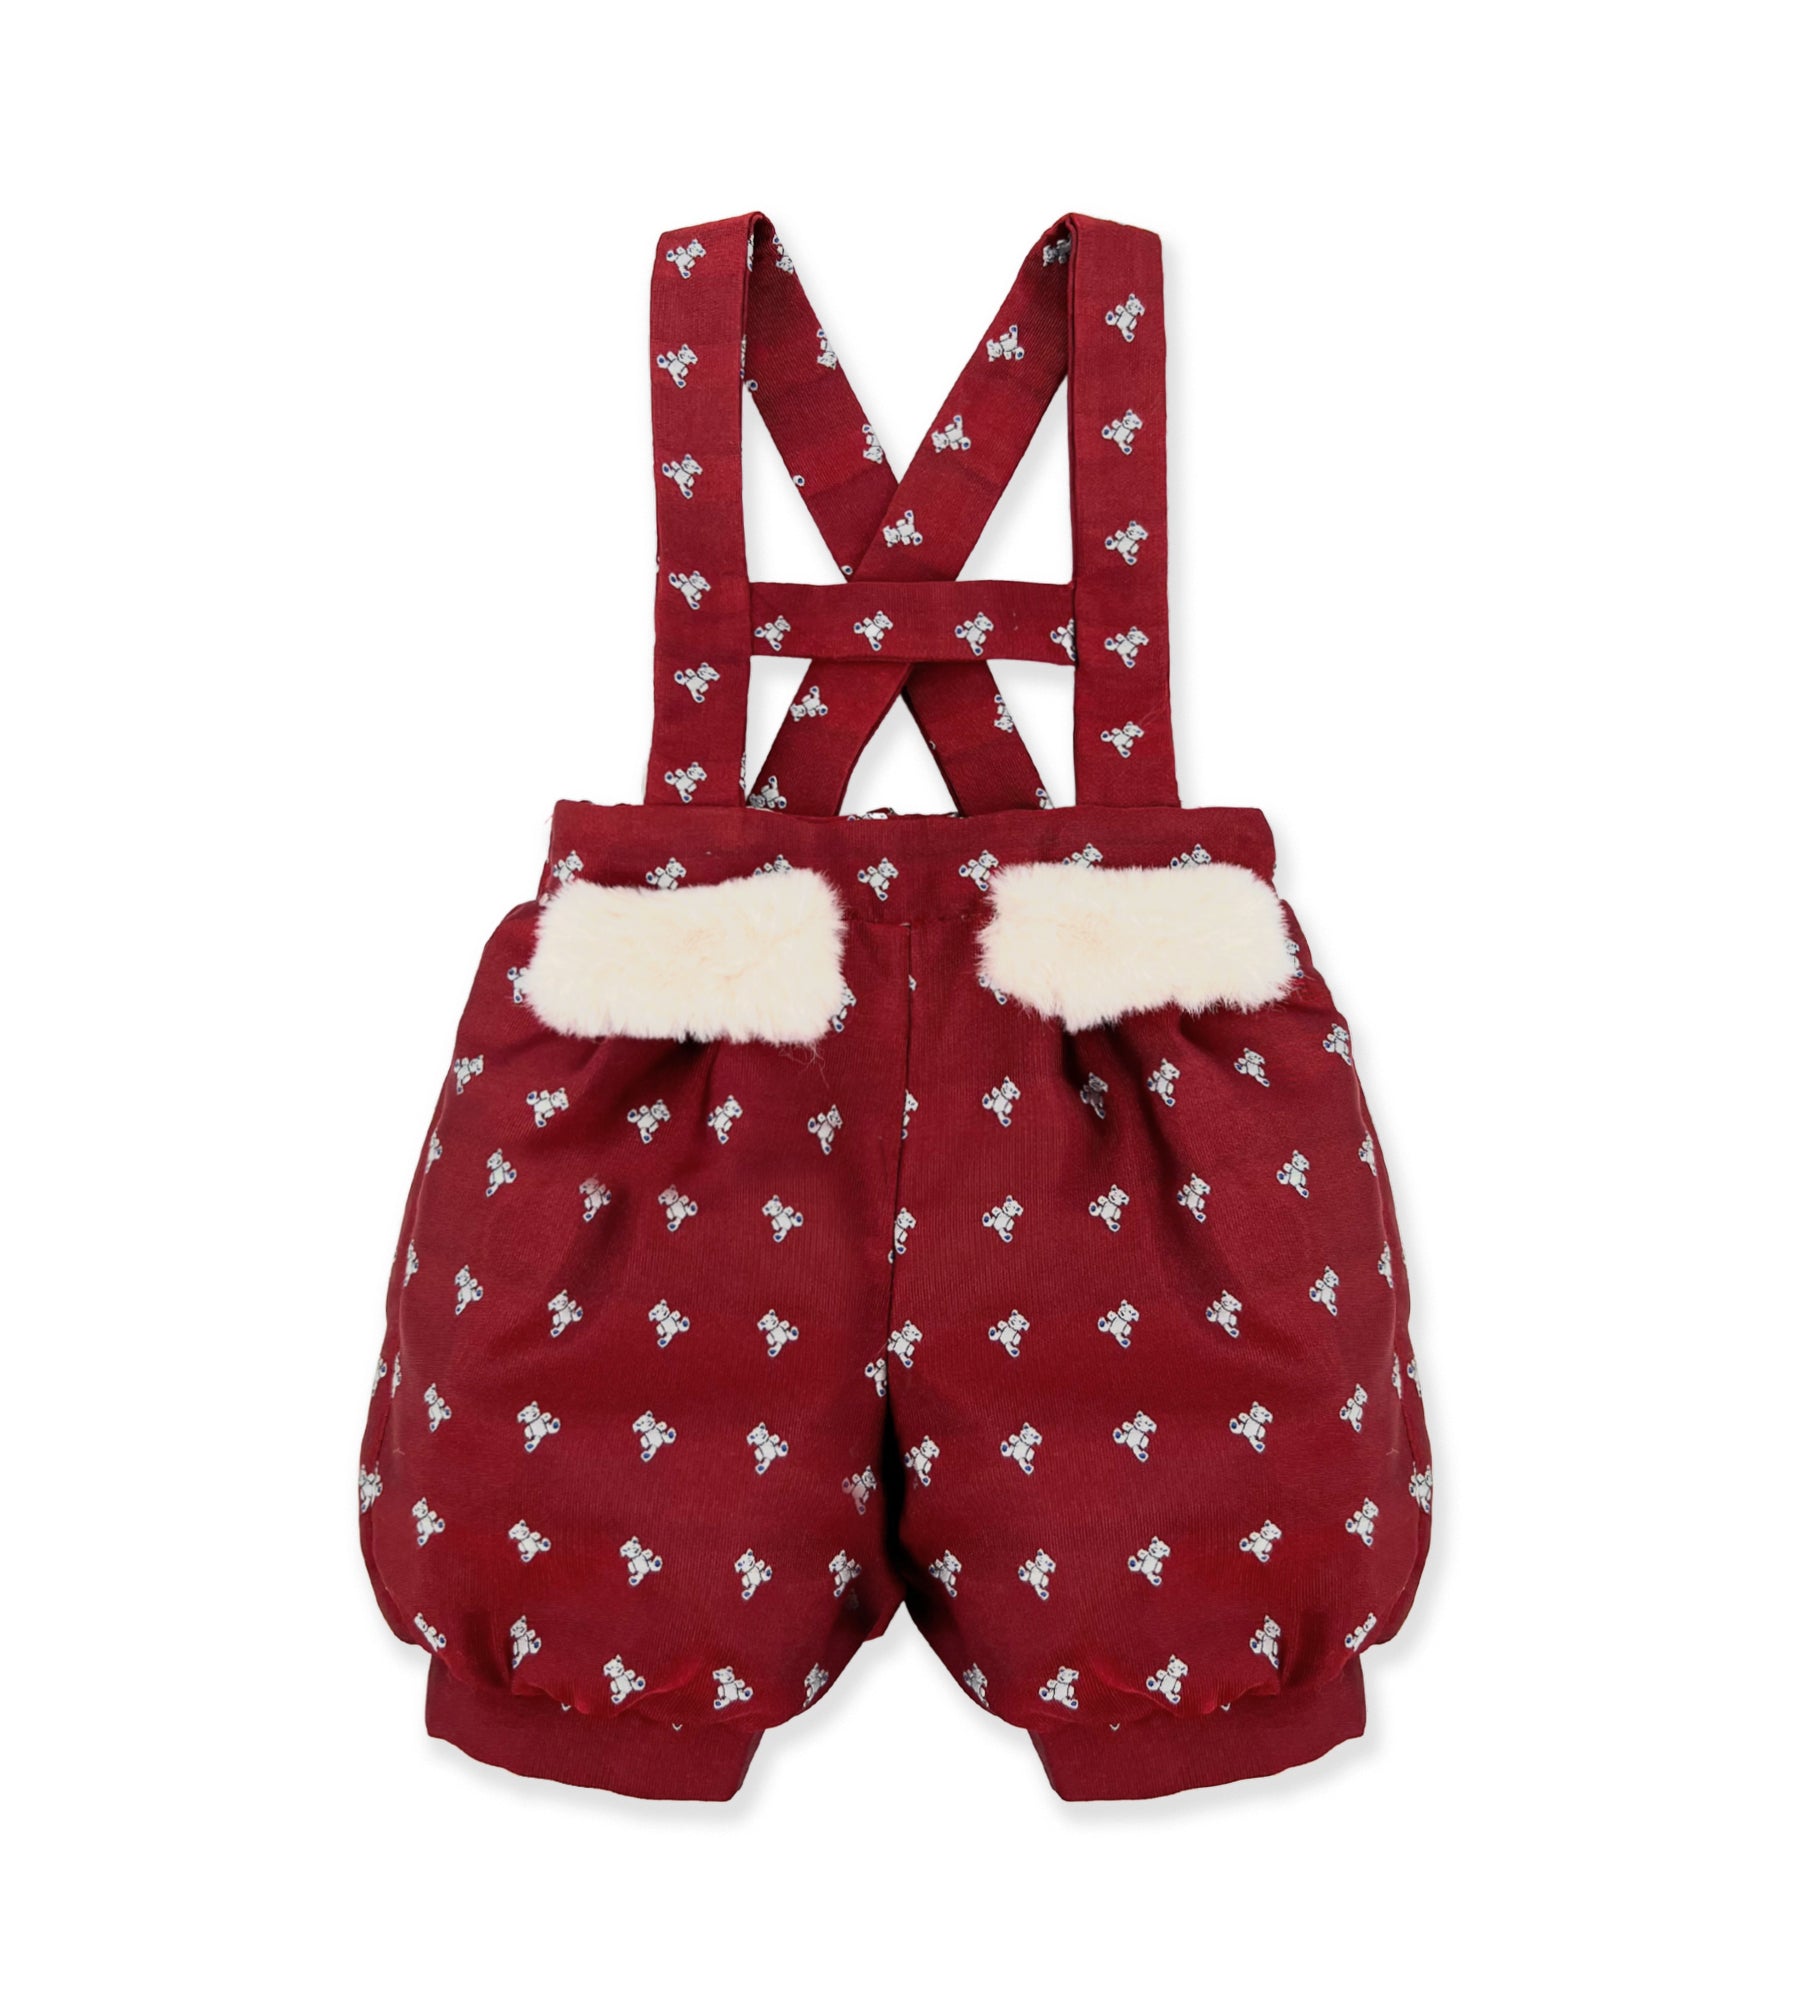 RED DUNGAREES WITH TEDDY BEARS